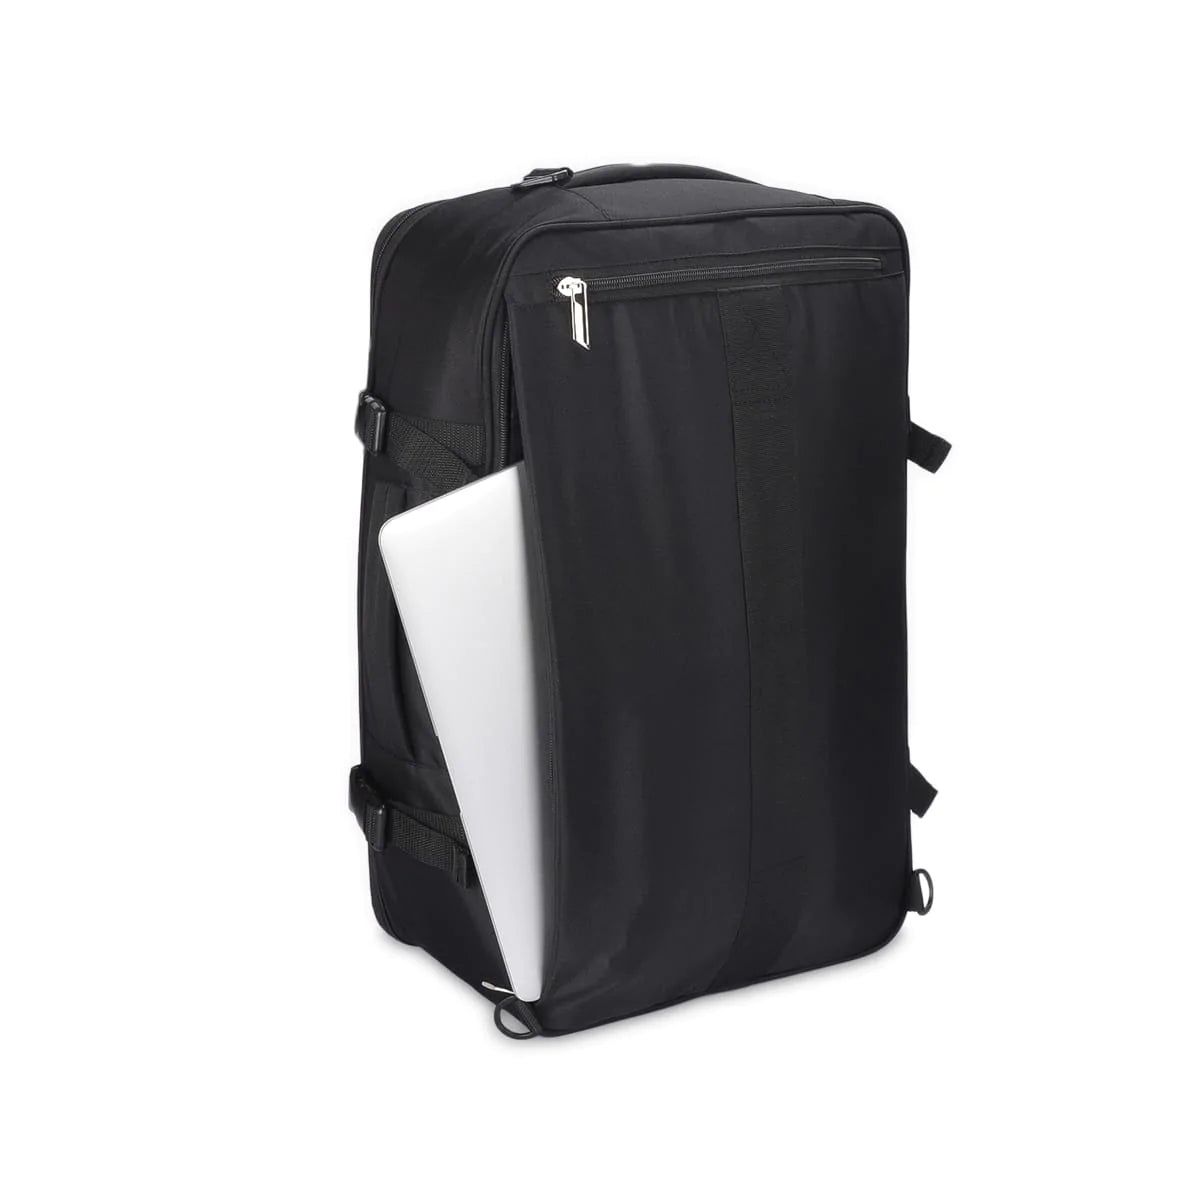 Black | Protecta Simple Equation Convertible Office Trave Laptop Backpack-5